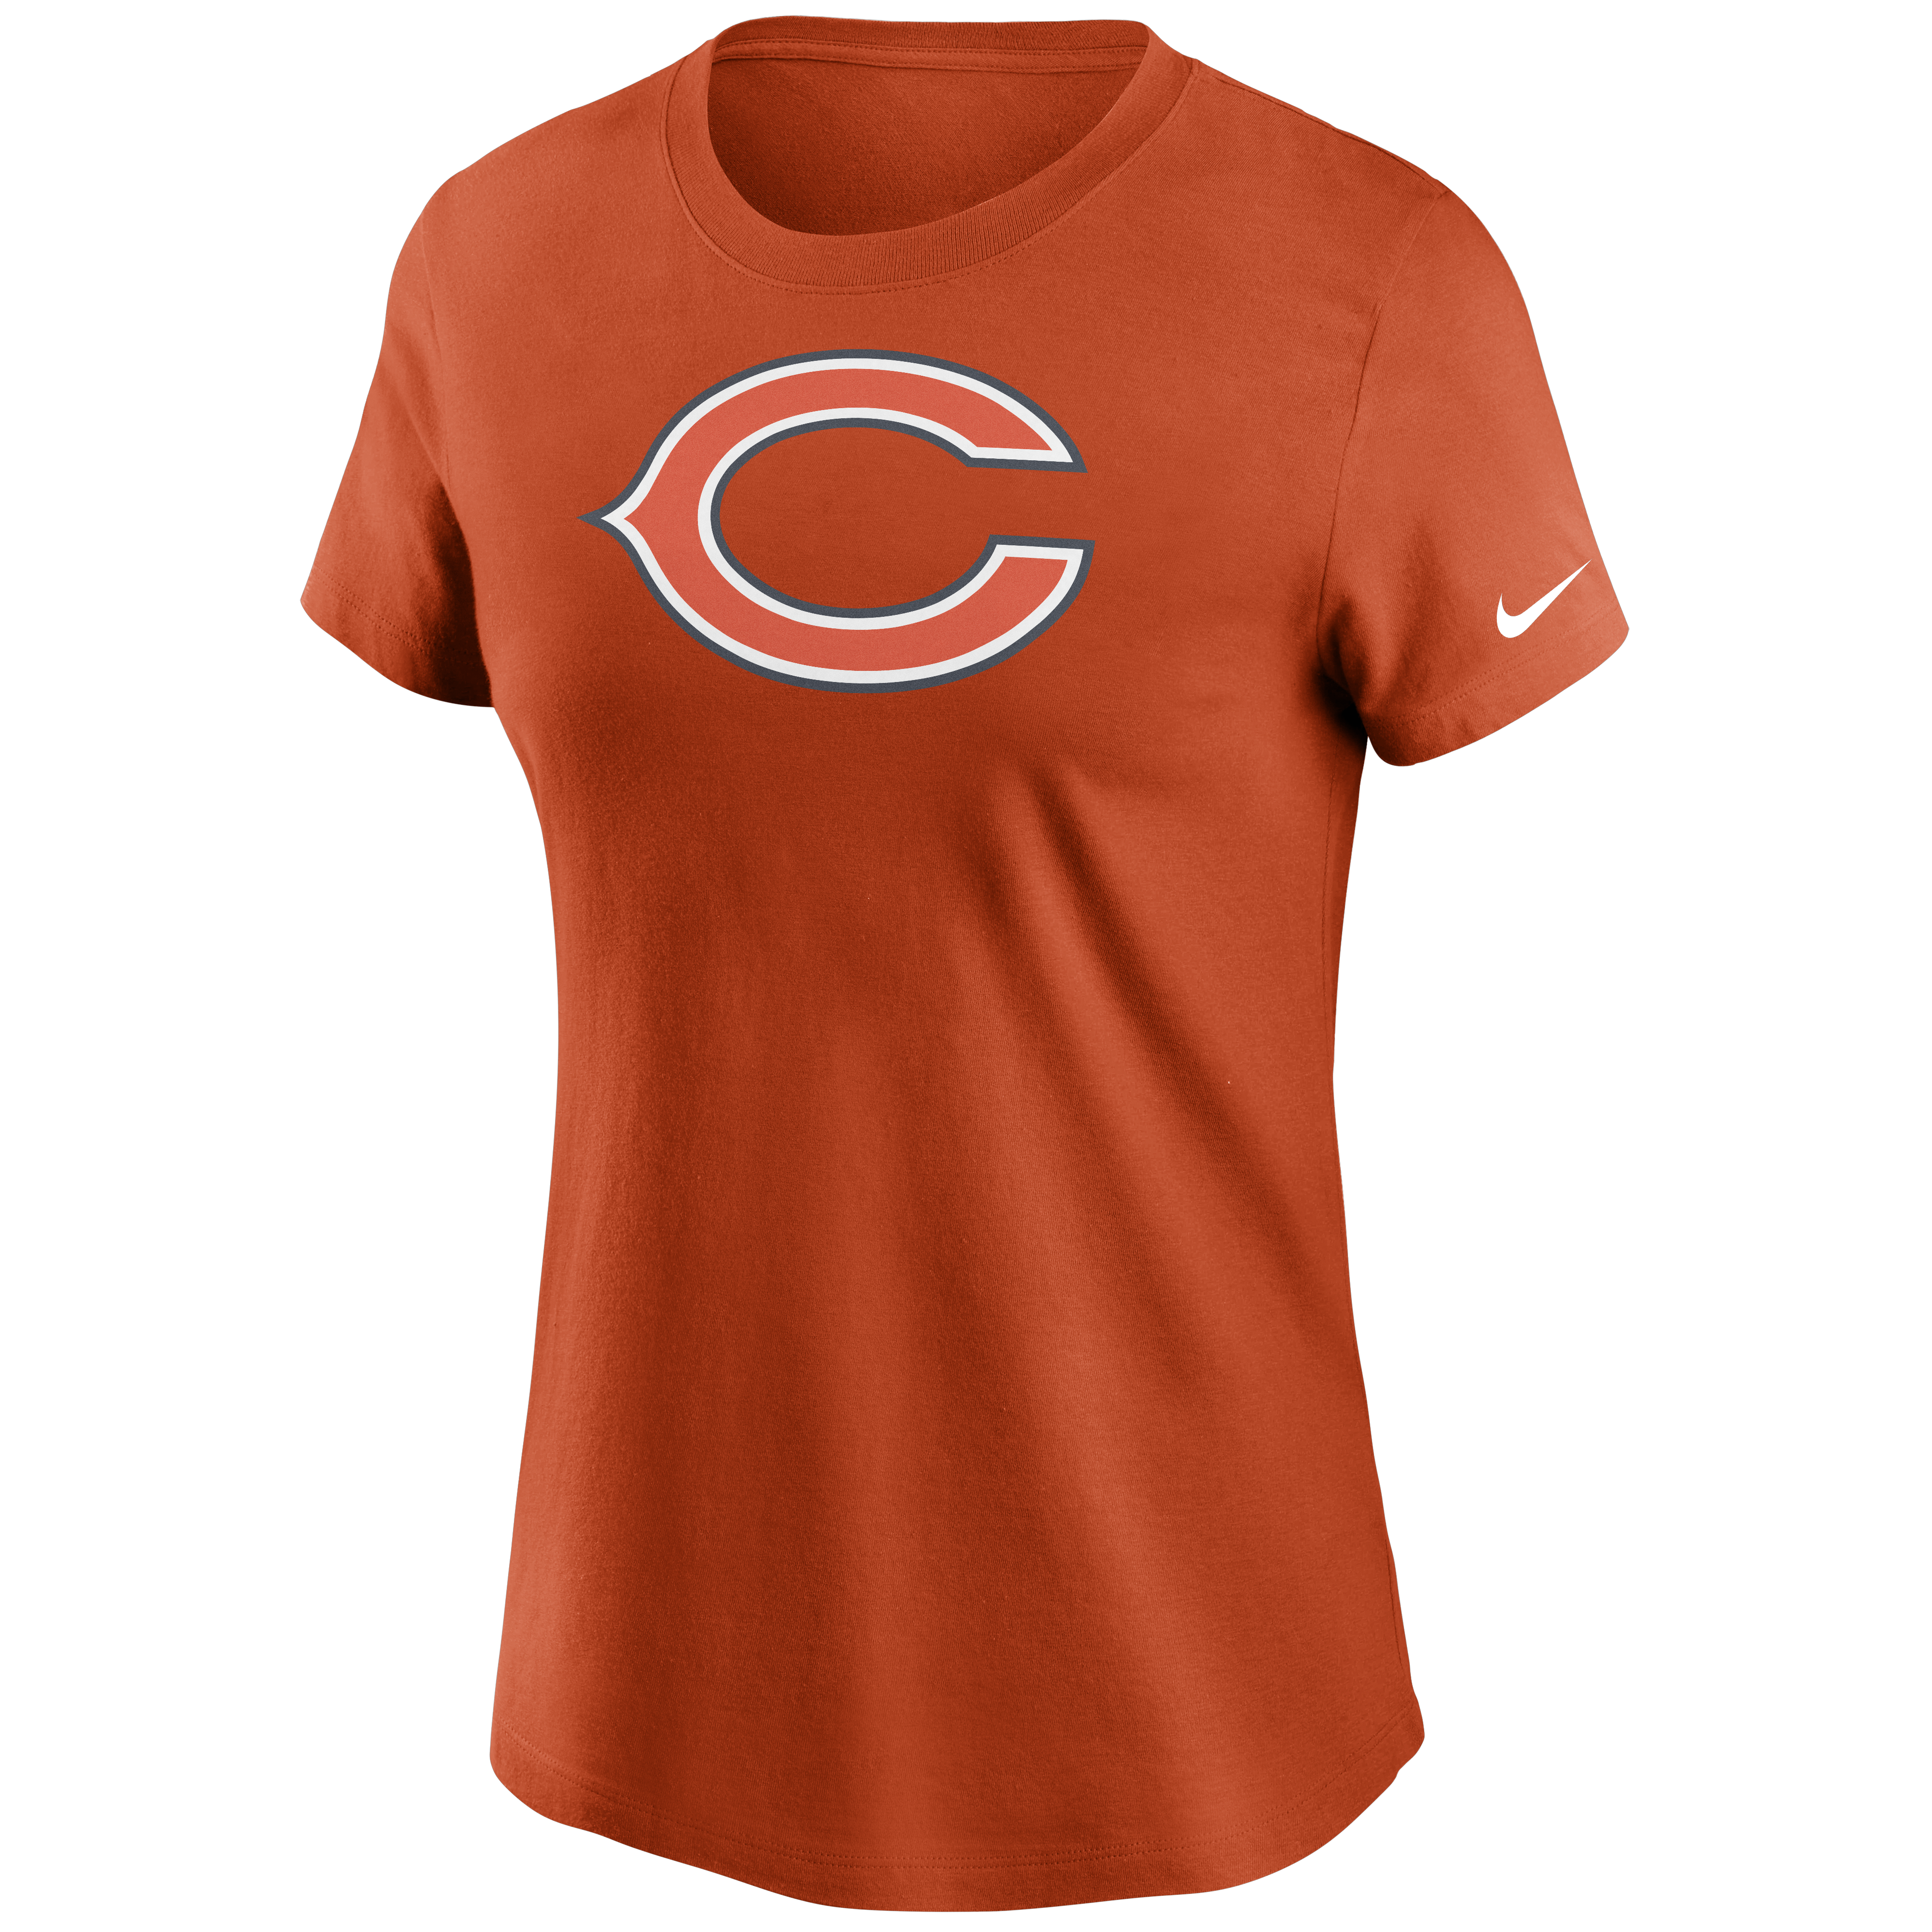 NFL CHICAGO BEARS TSHIRT SZ.S OLD NAVY CHIC.BEARS SZ.SMALL CHIC,BEARS SHIRT  S